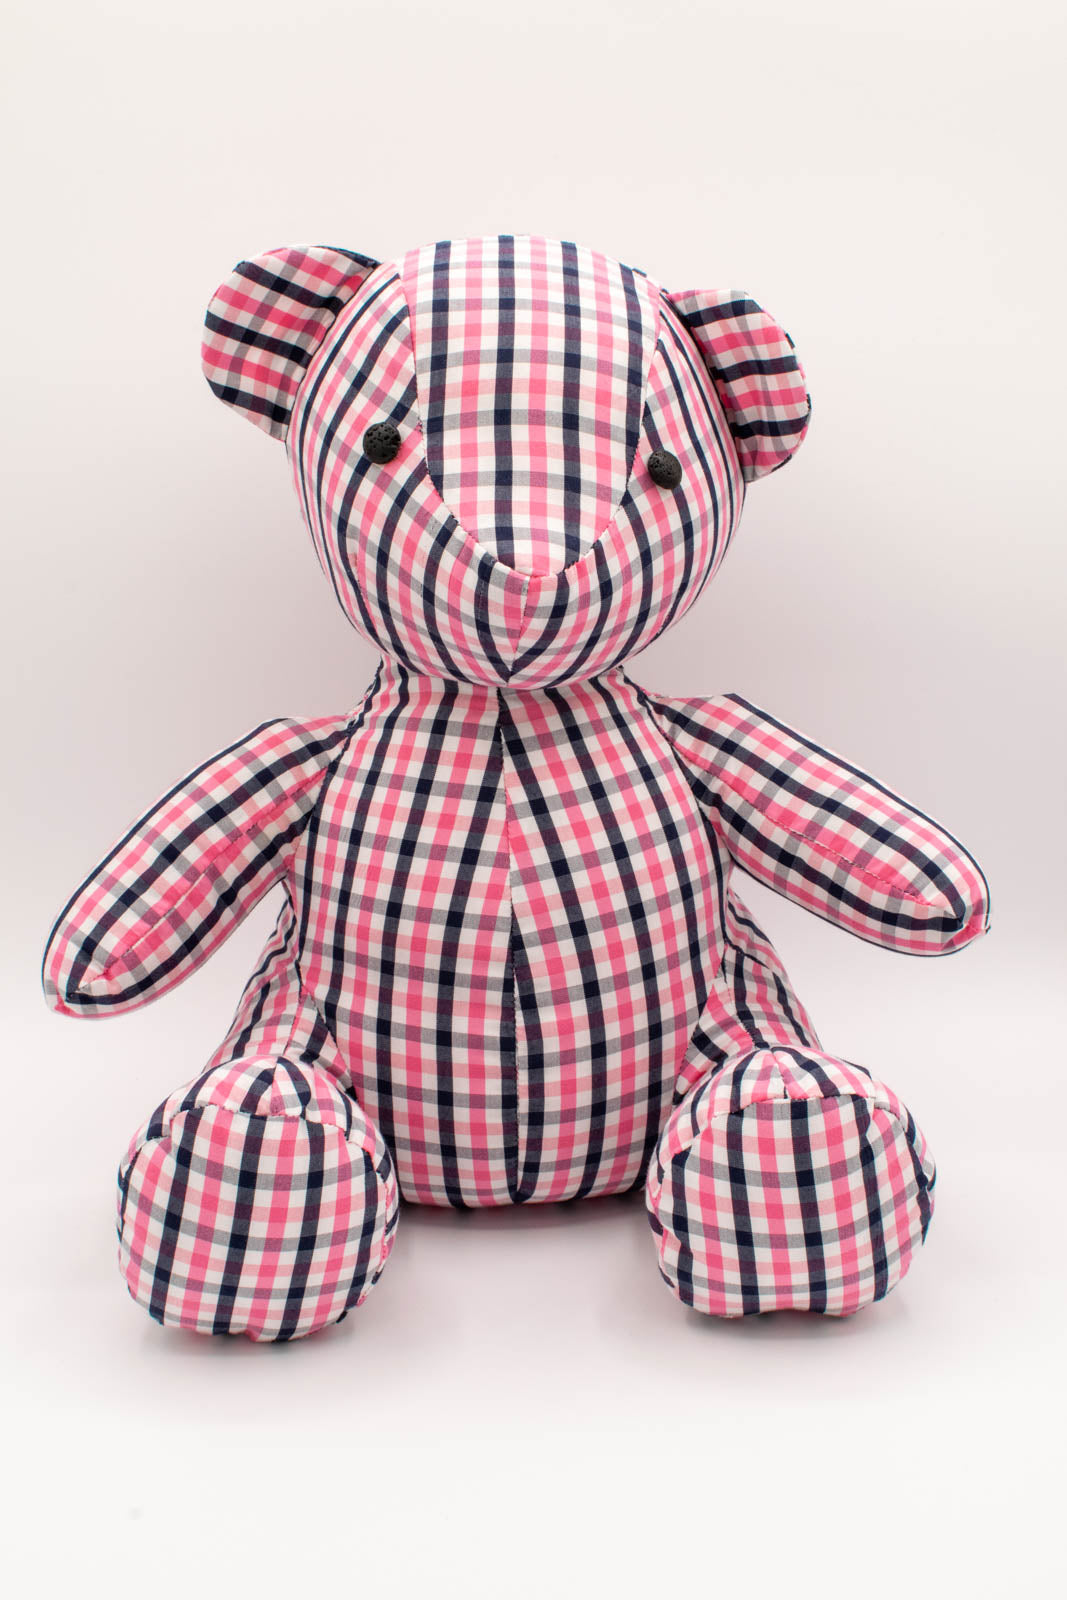 Blue and Pink Gingham Shirt Teddy Bear 2